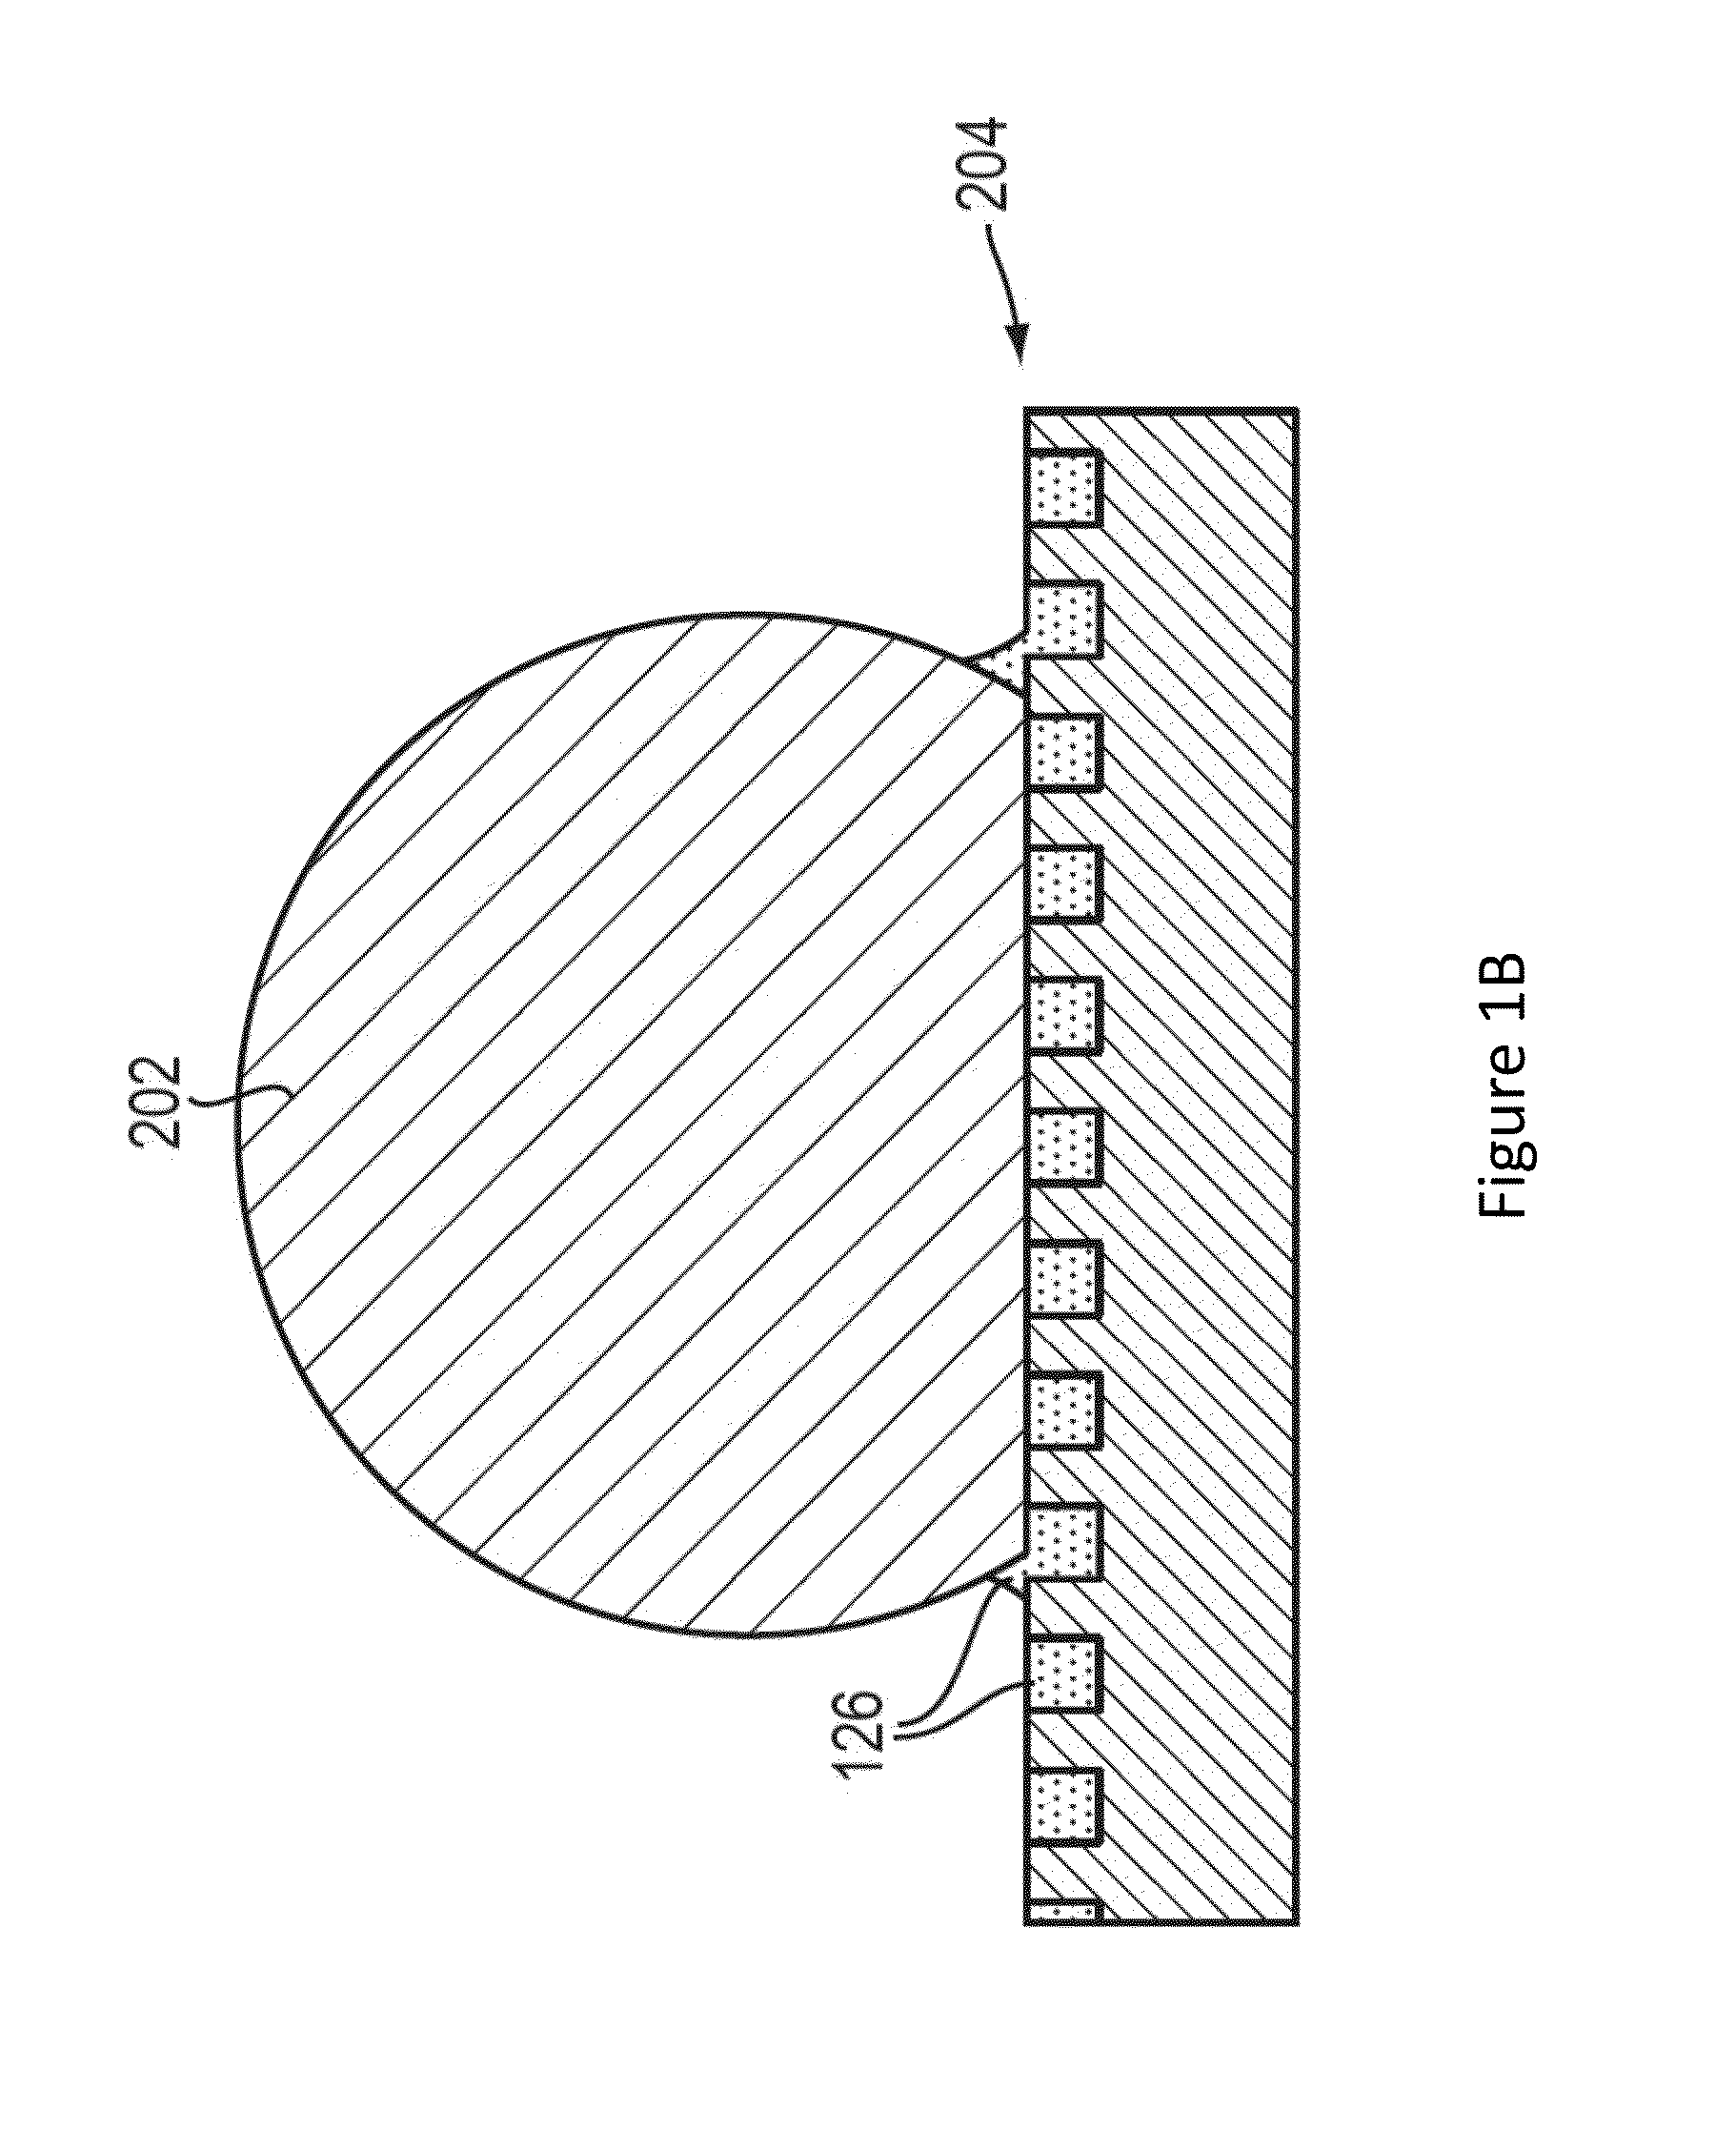 Lubricant-impregnated surfaces for electrochemical applications, and devices and systems using same